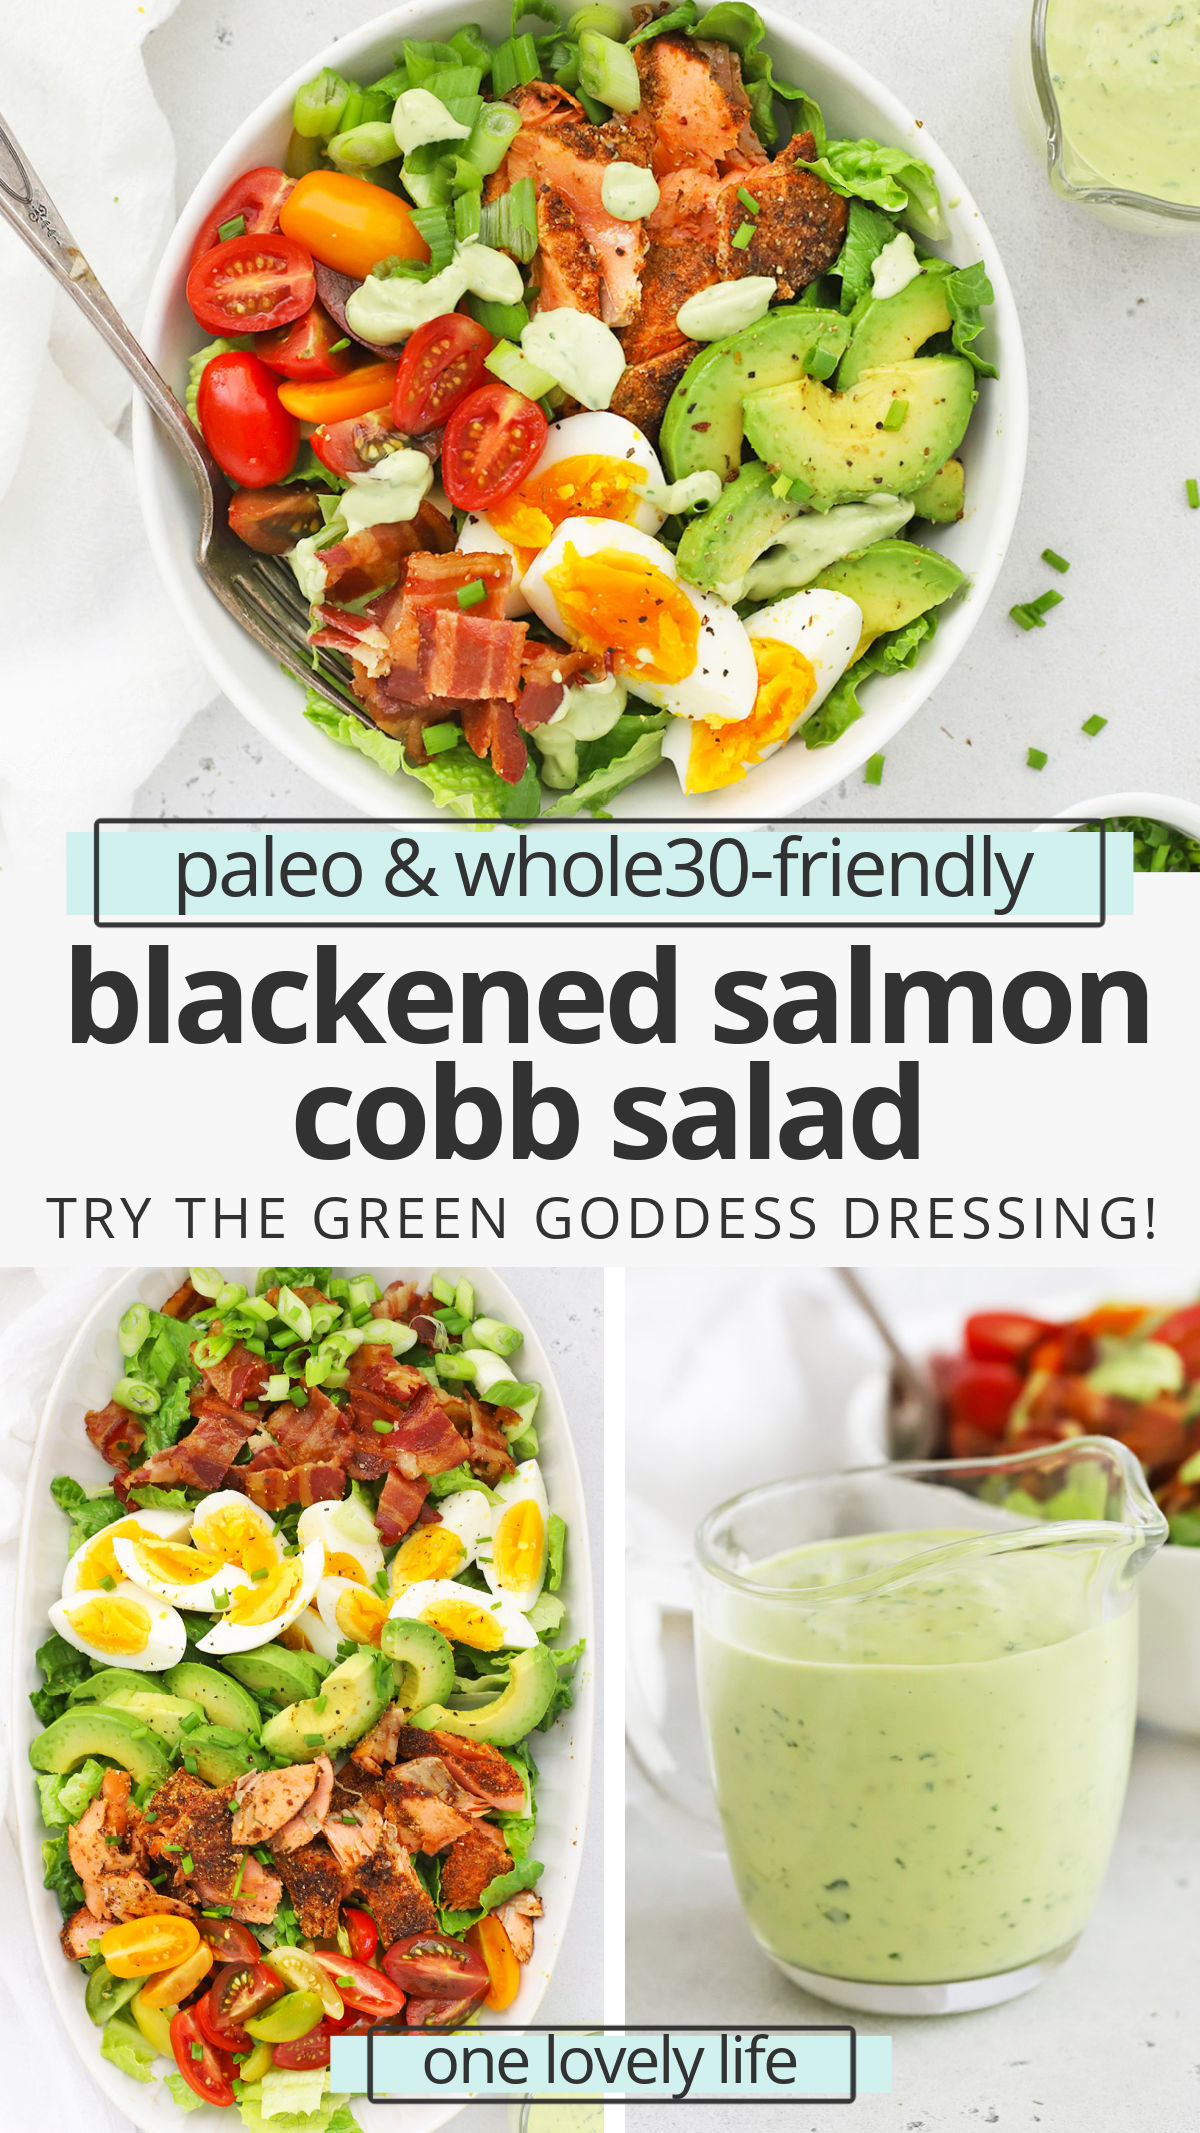 Blackened Salmon Cobb Salad - This salmon Cobb salad full of colorful veggies and finished with a creamy avocado green goddess dressing we can't get enough of! (Paleo, Whole30-Friendly) // Salmon Salad // Blackened Salmon Recipe // Salmon Cobb Recipe // Healthy Dinner // dinner salad // summer salad // green goddess salad // the best cobb salad // blackened cobb salad